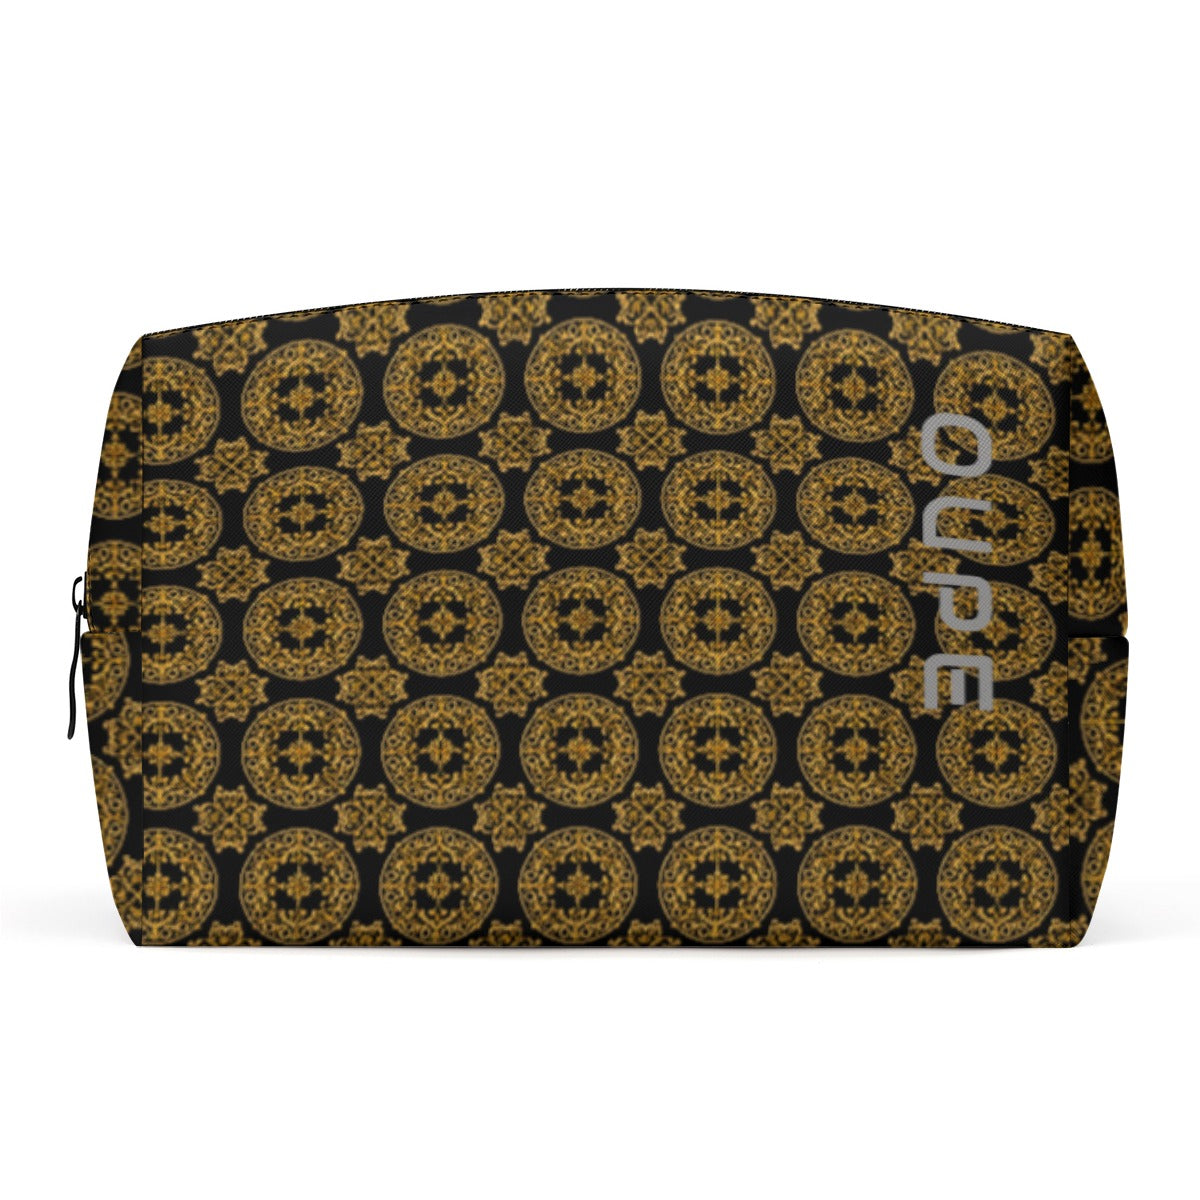 OUPE AC BAROQUE "PALACE" TOILETRY BAG II